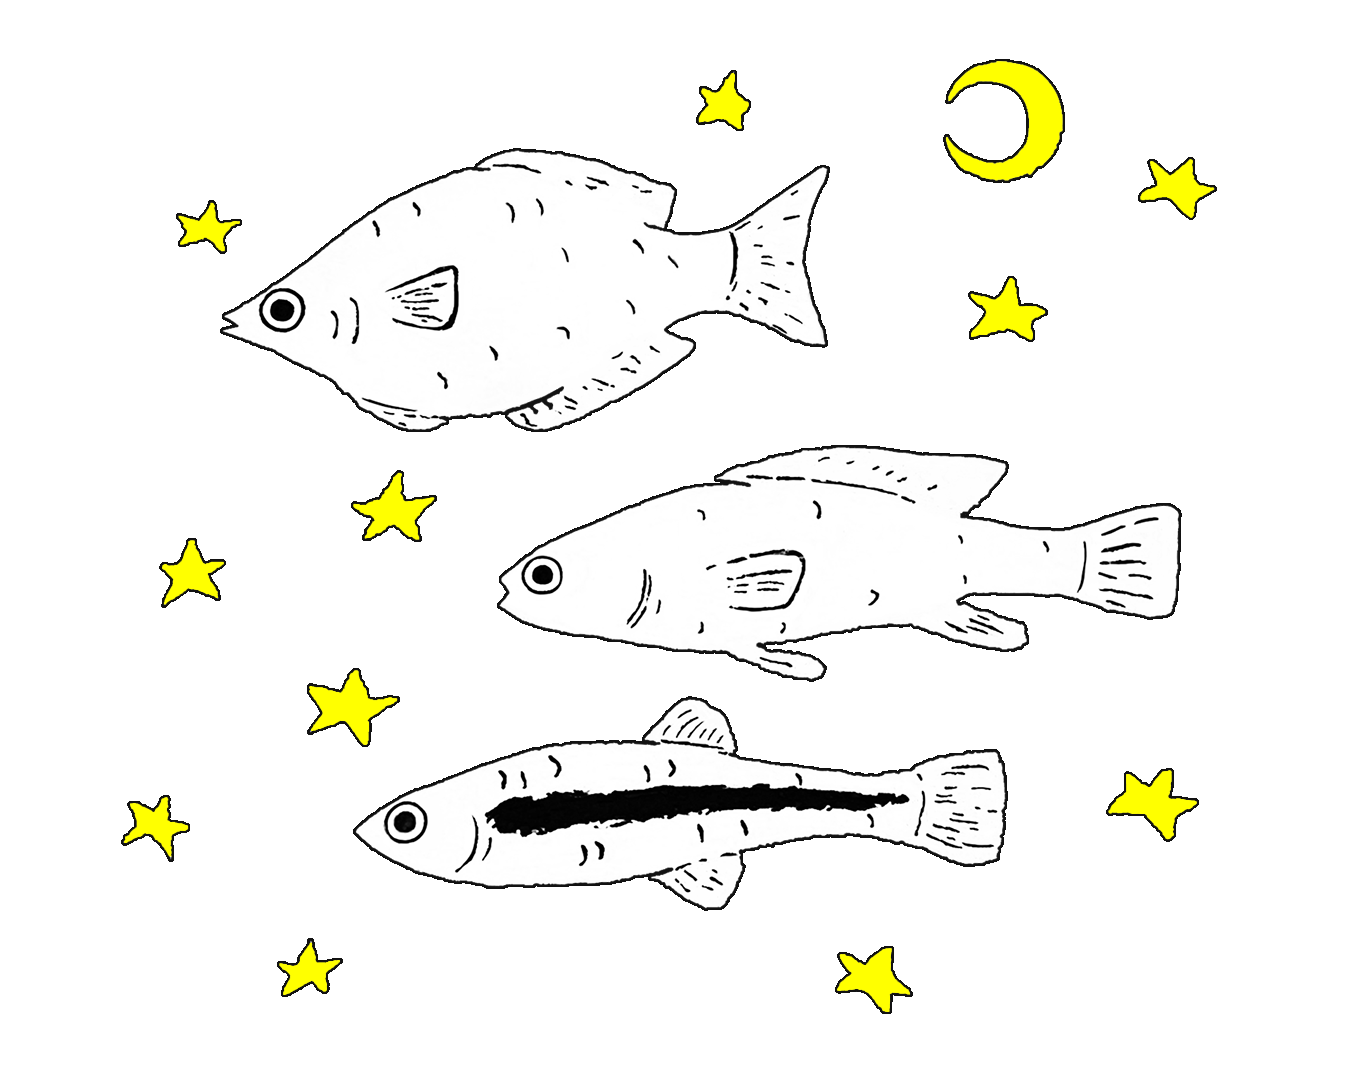 Drawing of 3 simply stylized black-and-white fish on a slightly off-black background with several small white stars and a small white crescent moon scattered amongst them. The fish are each different sizes and shapes; the top fish is more flat-bodied, the middle fish is longer and thinner, and the bottom fish is the thinnest with a thick black line running horizontally down its side.